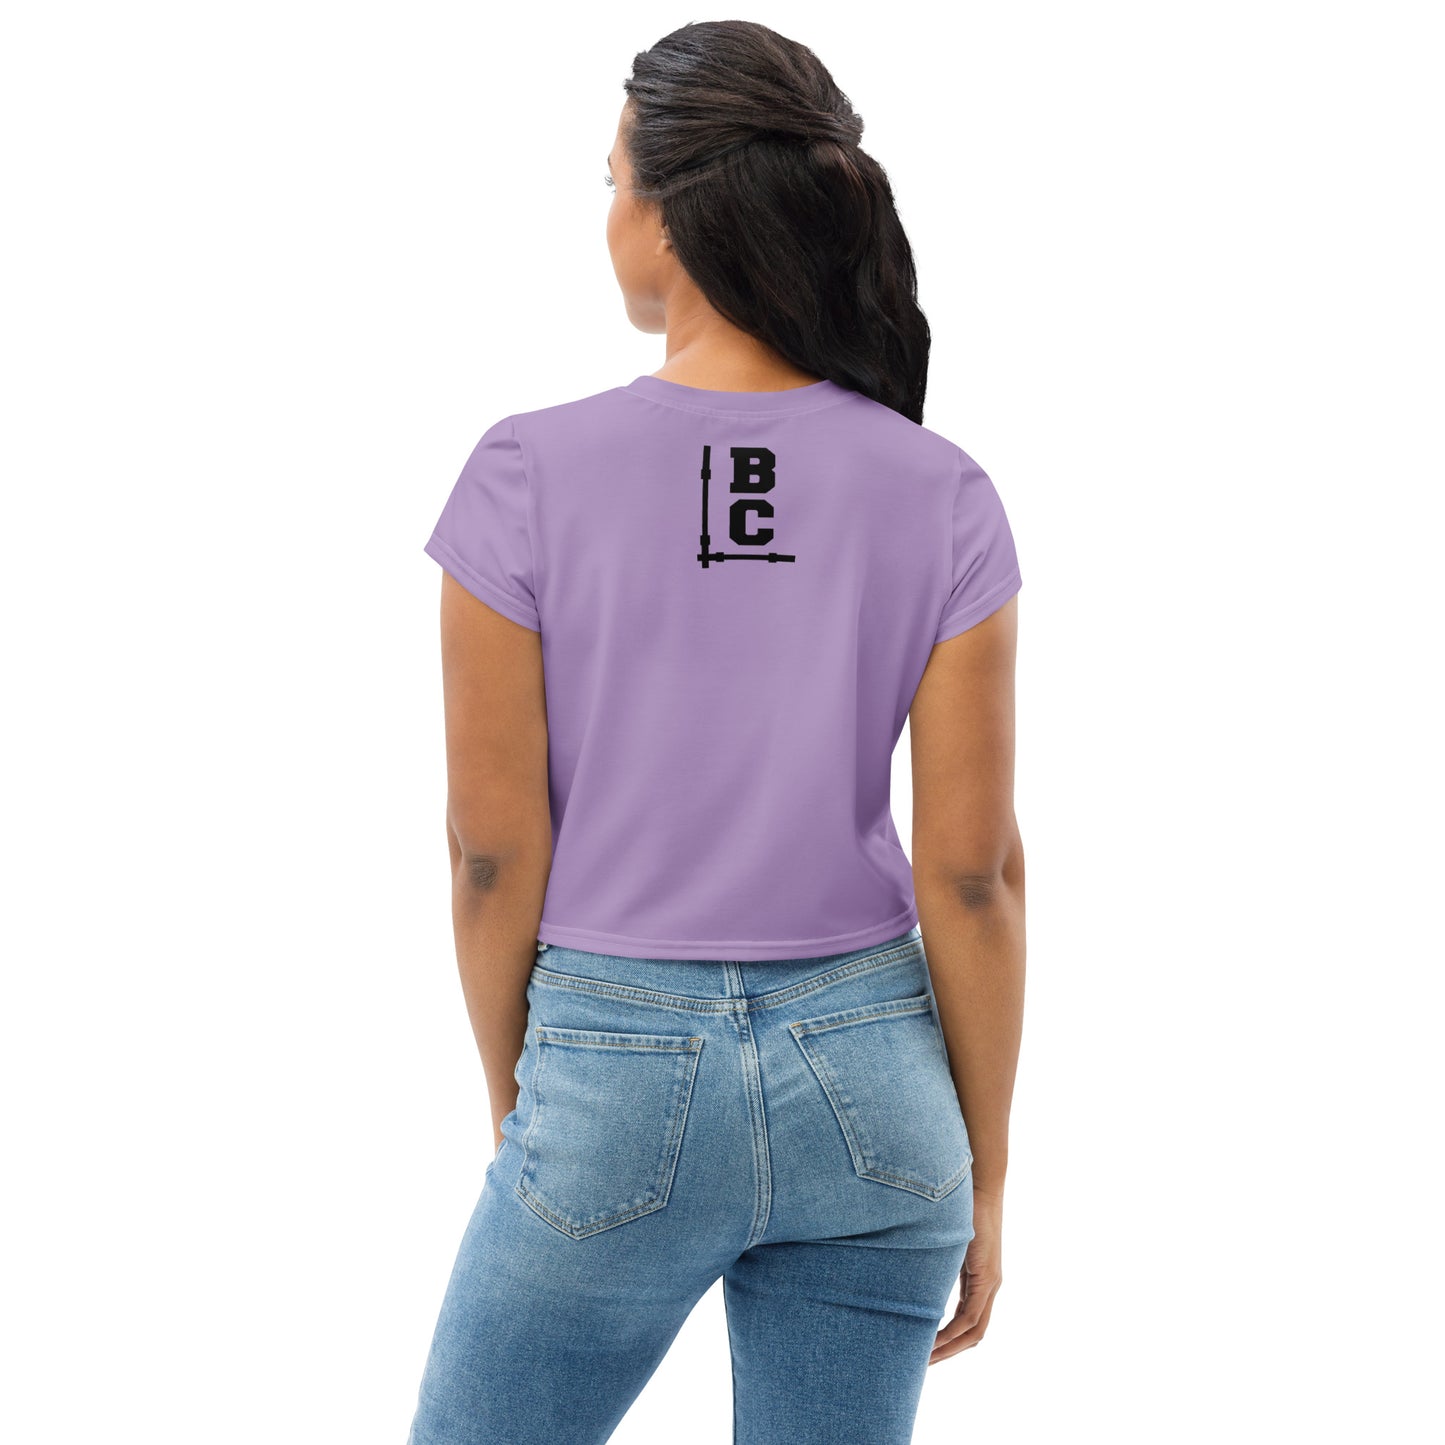 Lowcountry Barbell Club Iconic Crop Top - Twilight